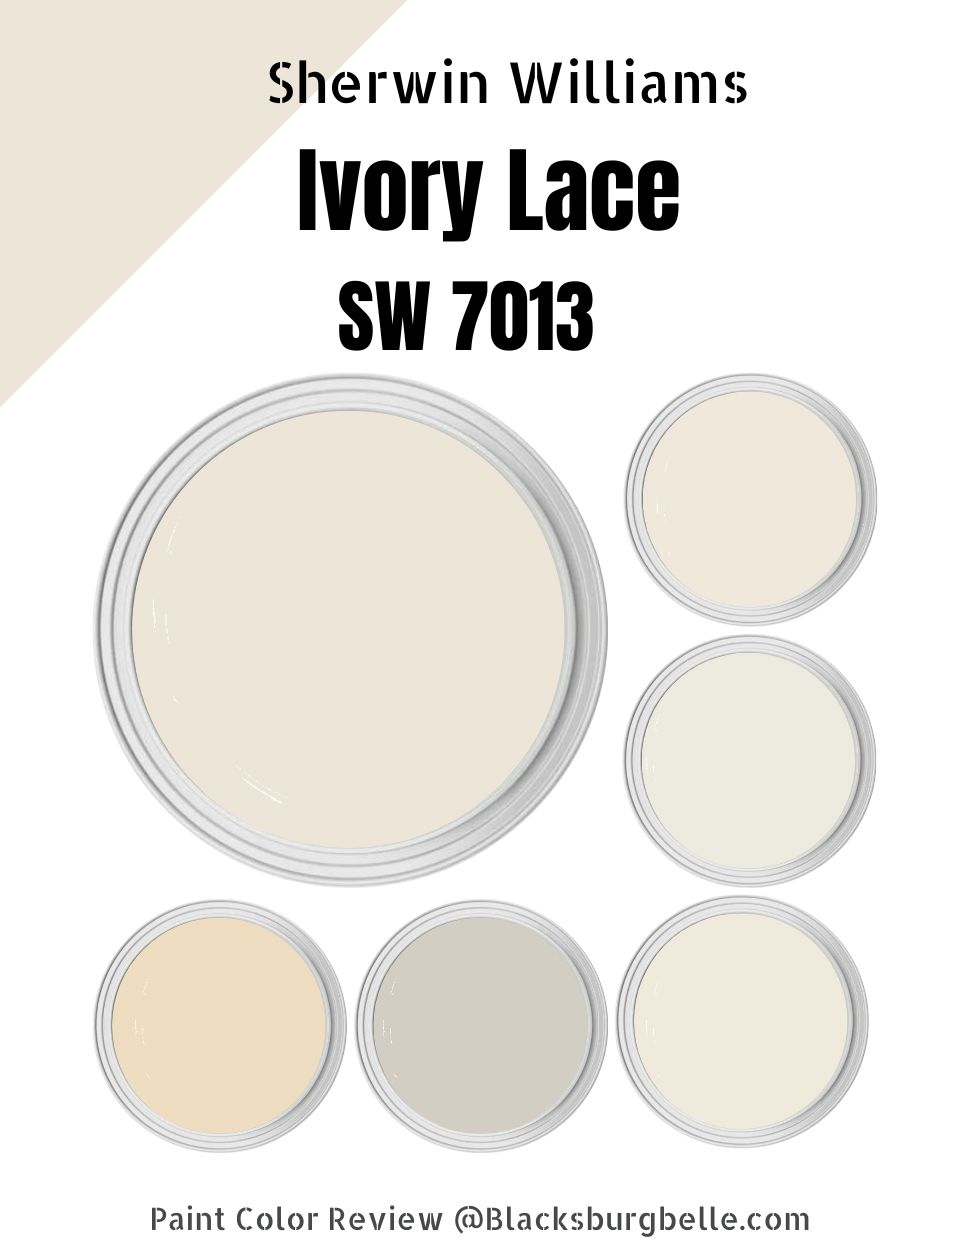 Sherwin Williams Ivory Lace (Palette, Coordinating & Inspirations)